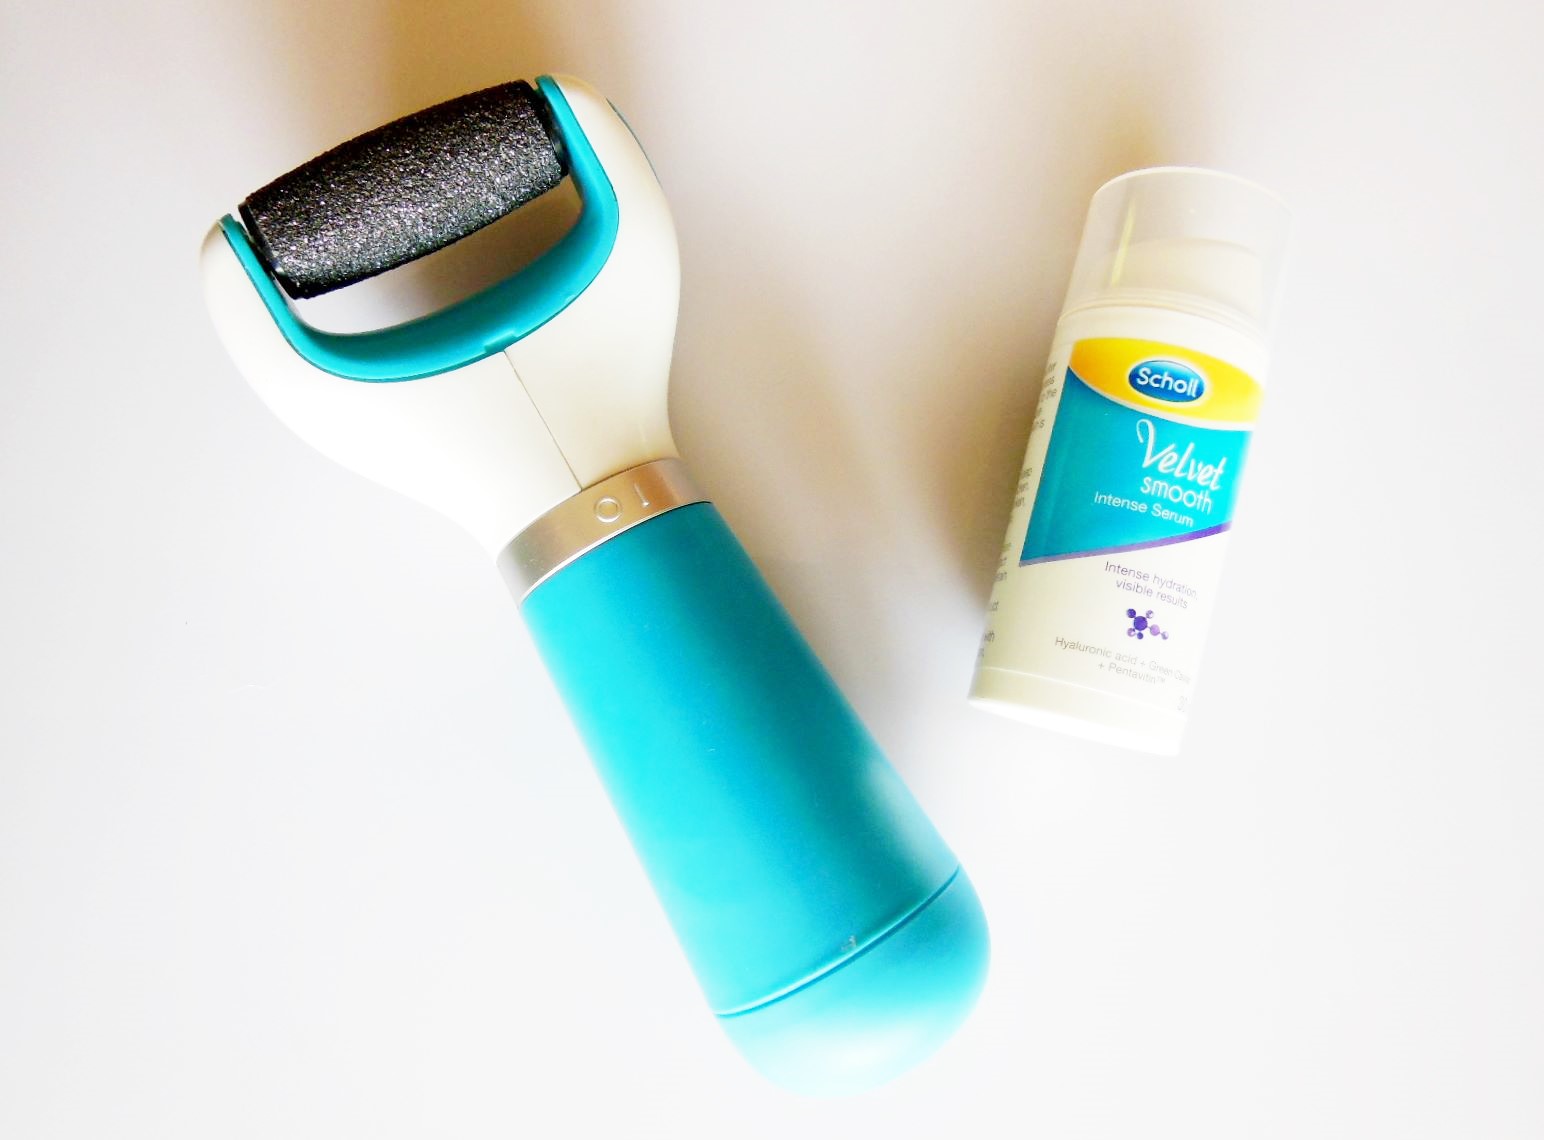 Maryanne Jones majoor Slaapkamer PRODUCT REVIEW: SCHOLL VELVET SMOOTH EXPRESS PEDI ELECTRONIC FOOT FILE AND  SMOOTH INTENSE SERUM | The Beauty & Lifestyle Hunter